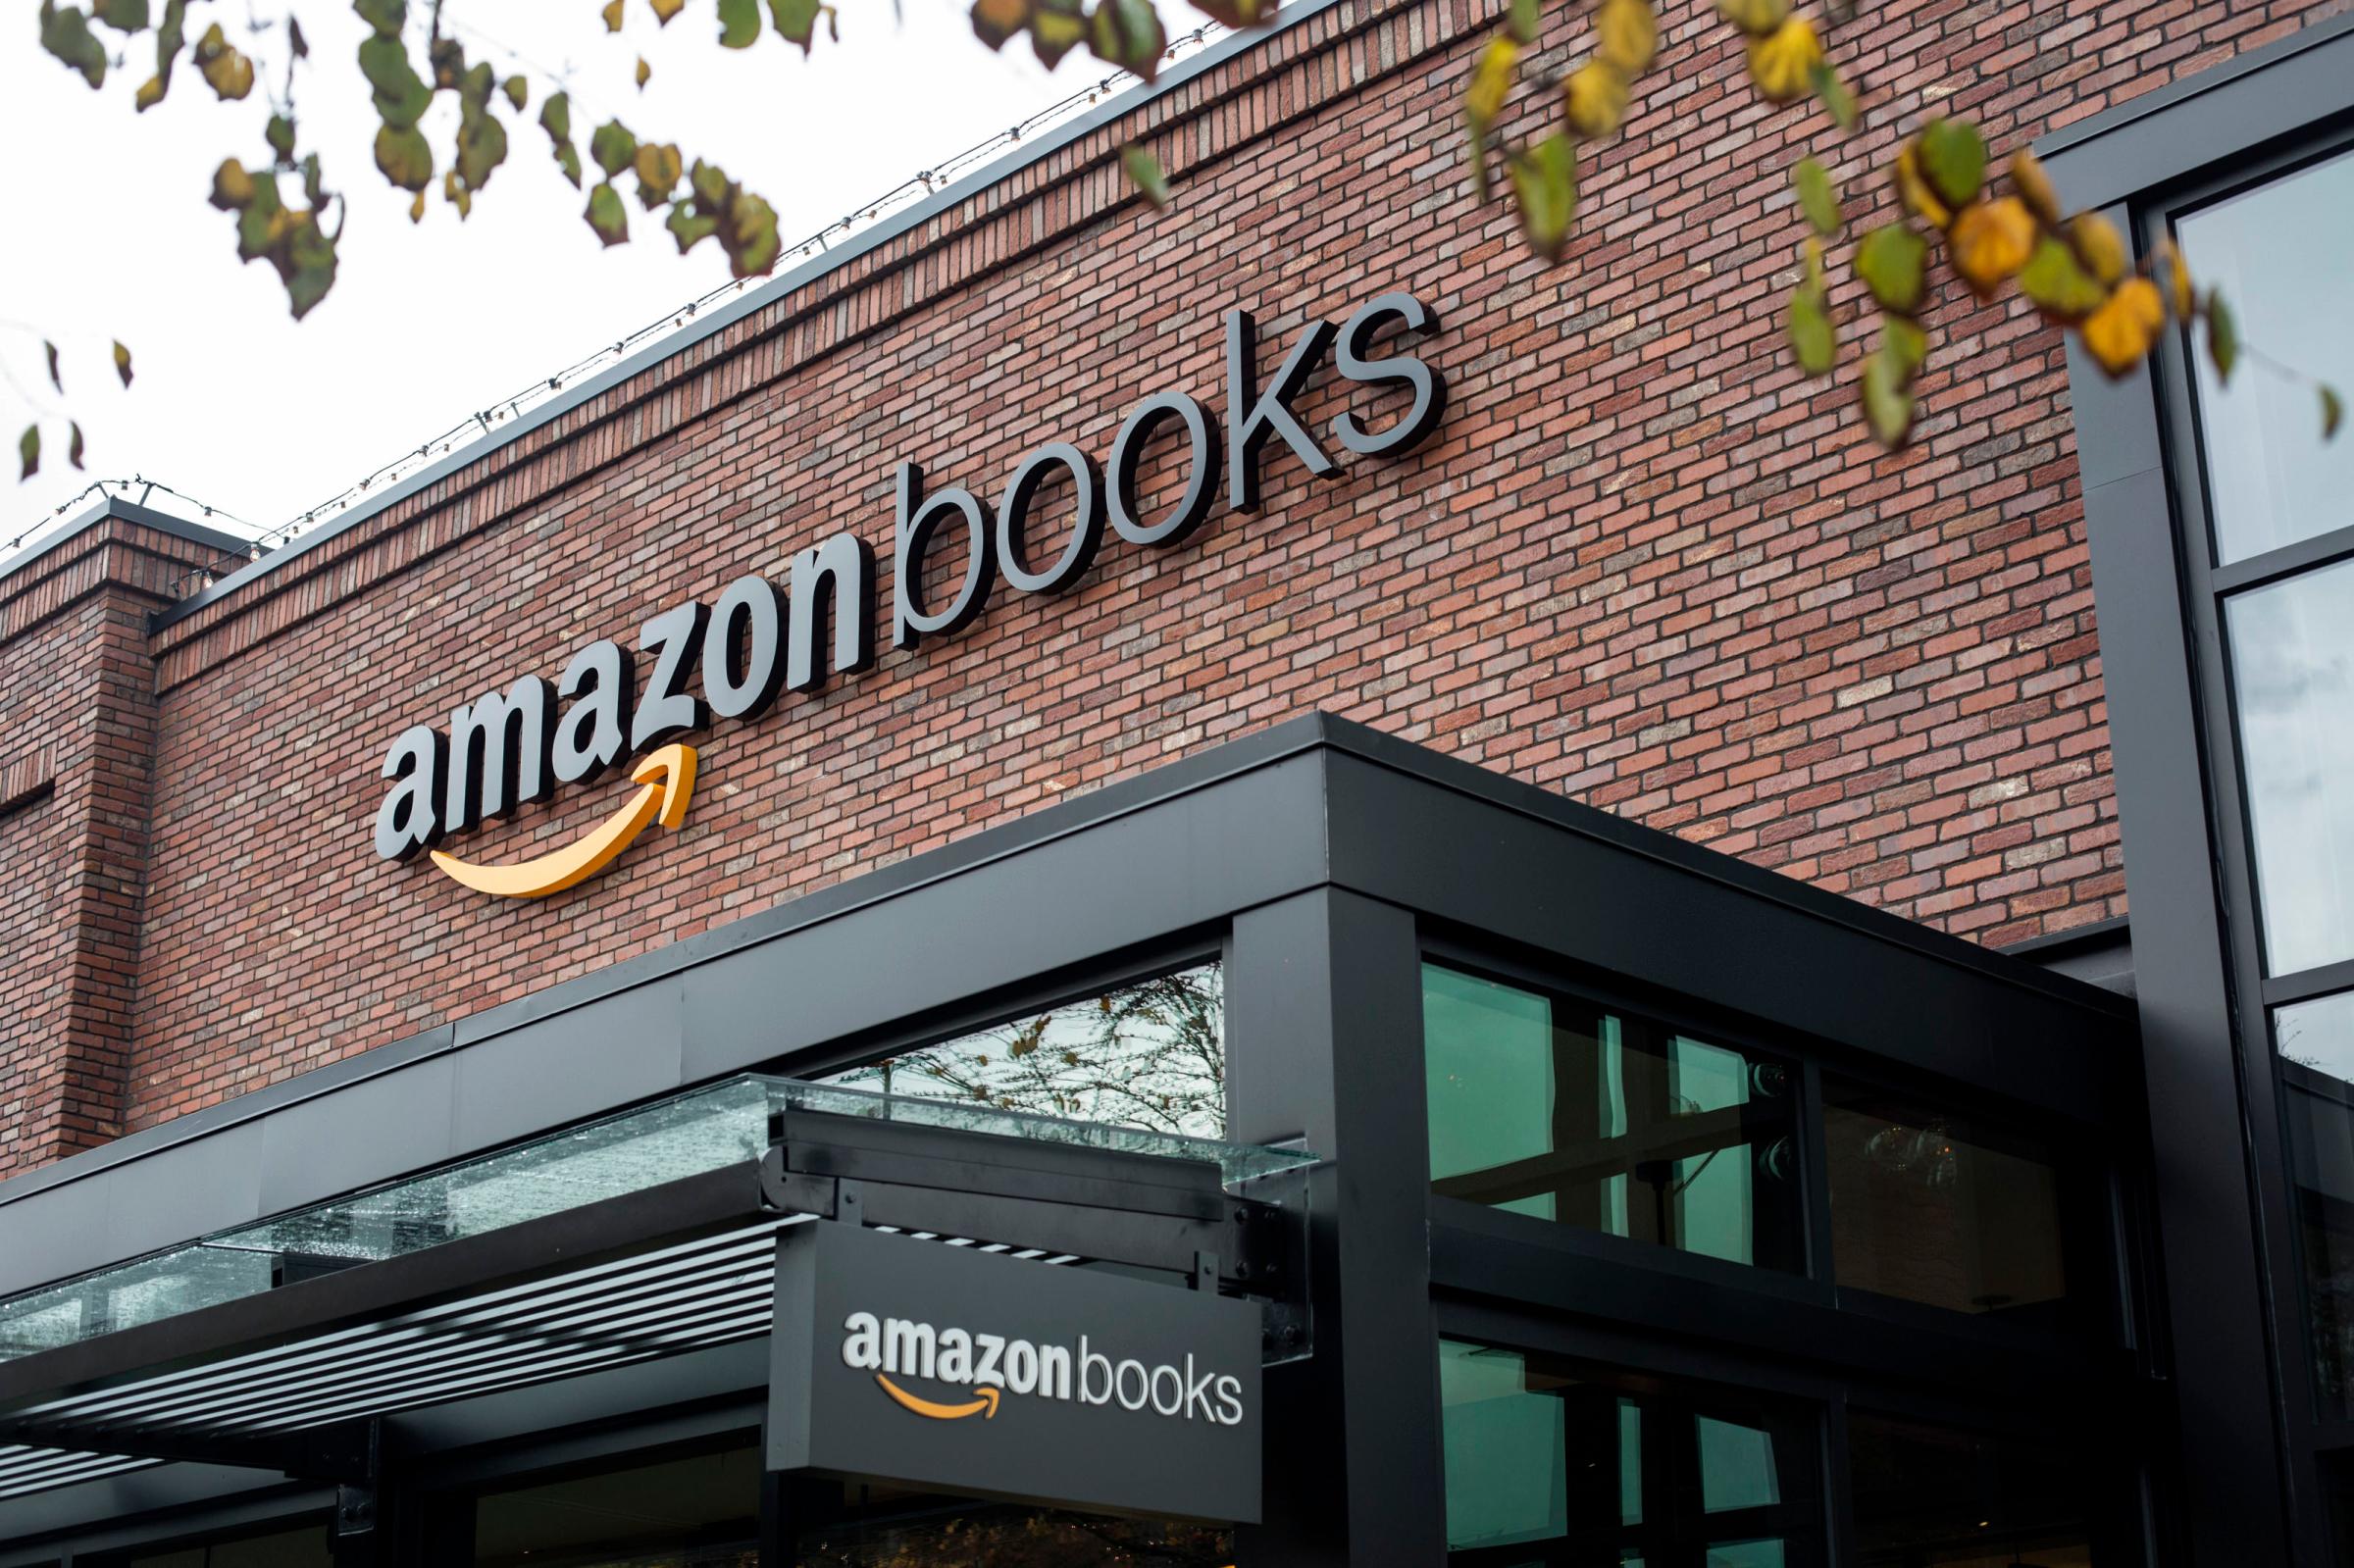 The exterior of Amazon Books is pictured in Seattle, Washington, on Tuesday, Nov. 3, 2015. The online retailer Amazon.com Inc. opened its first brick-and-mortar location in Seattle's upscale University Village mall. Photographer: David Ryder/Bloomberg